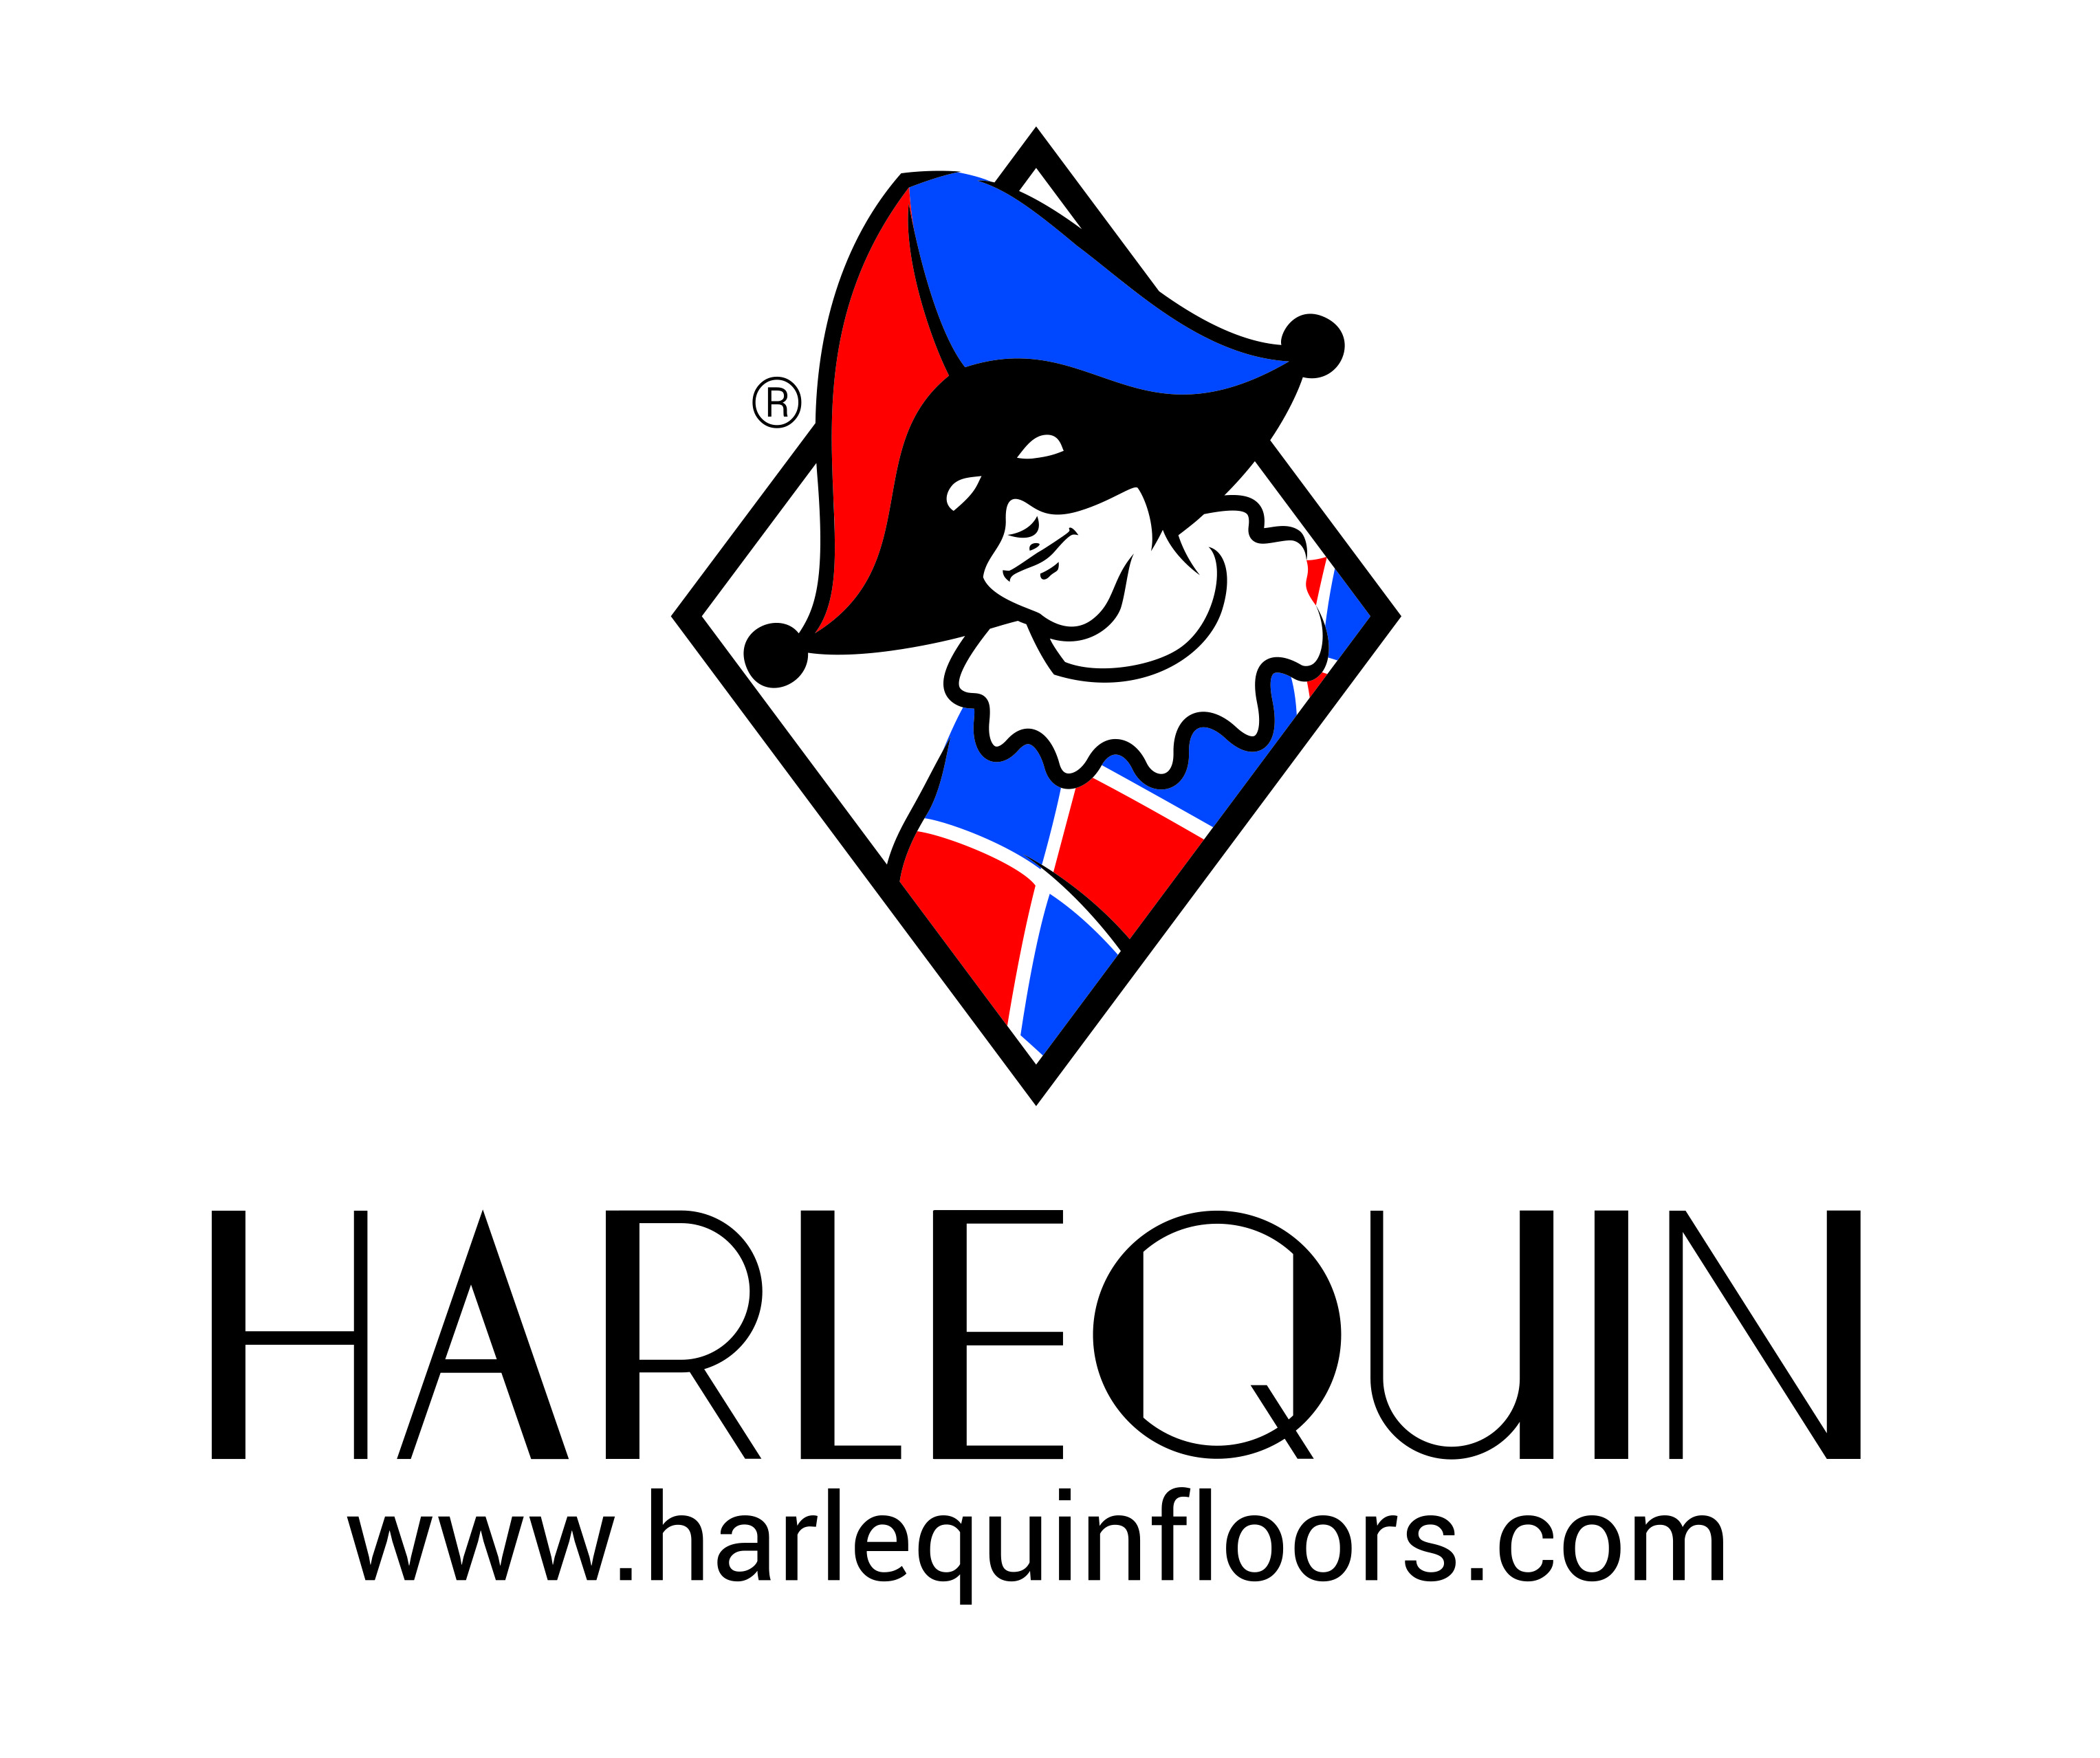 Harlequin Floors Reports Record Global Growth Tpi